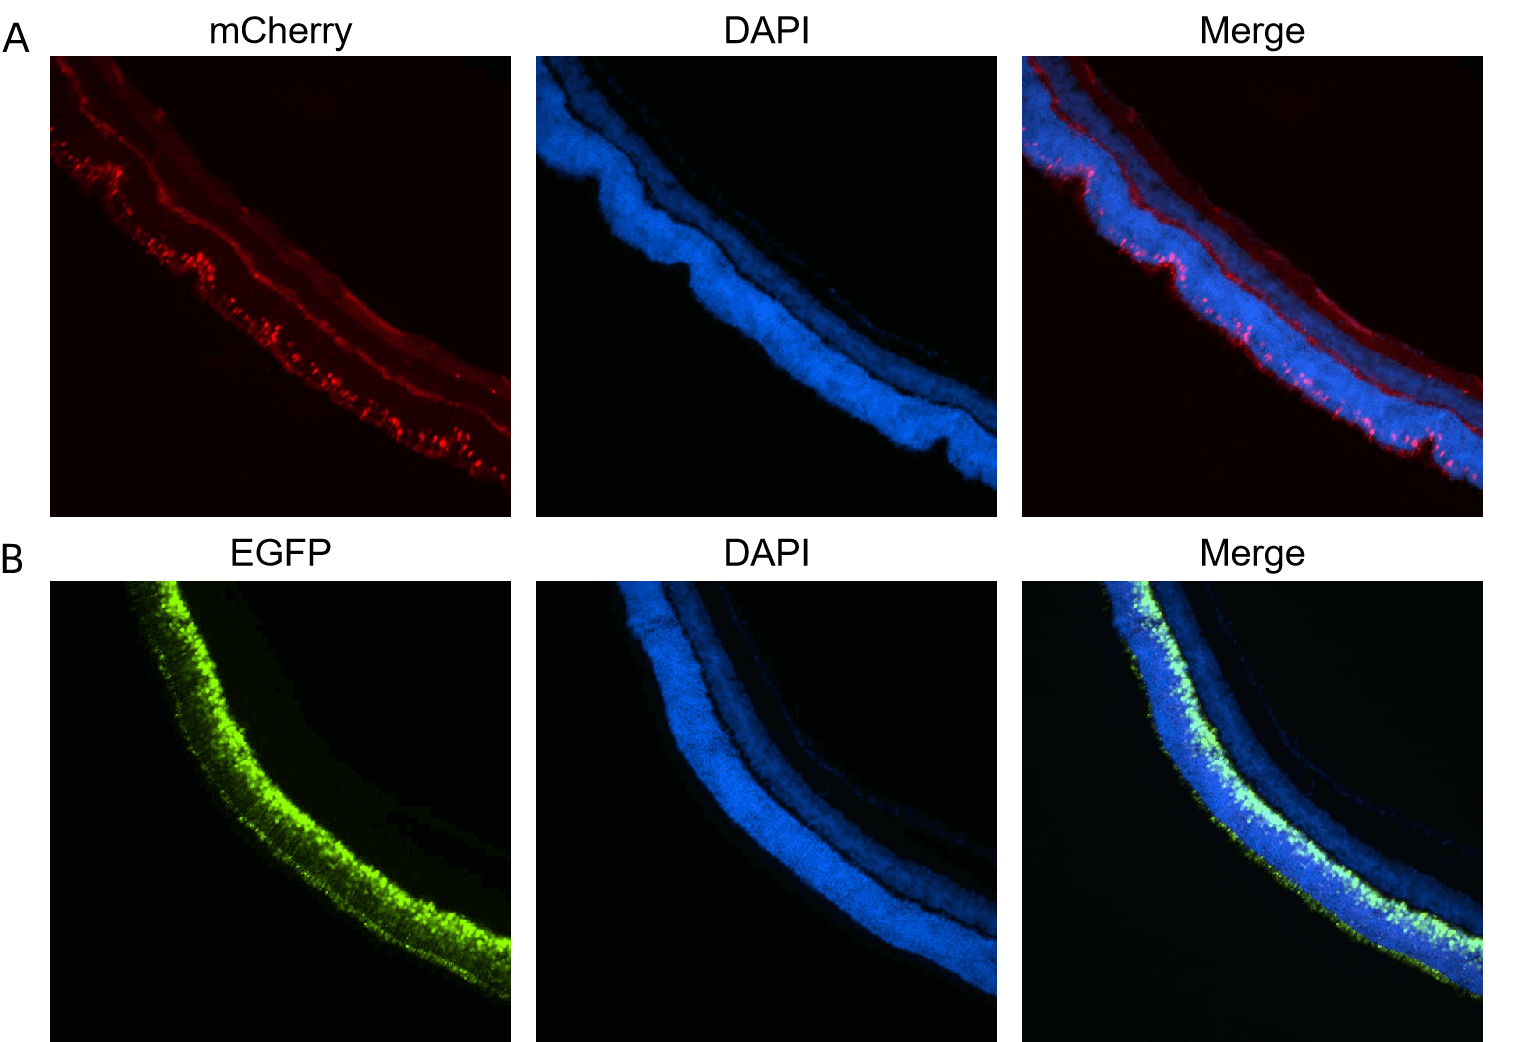 AAV8 expressing mCherry and EGFP in the retina of mice.